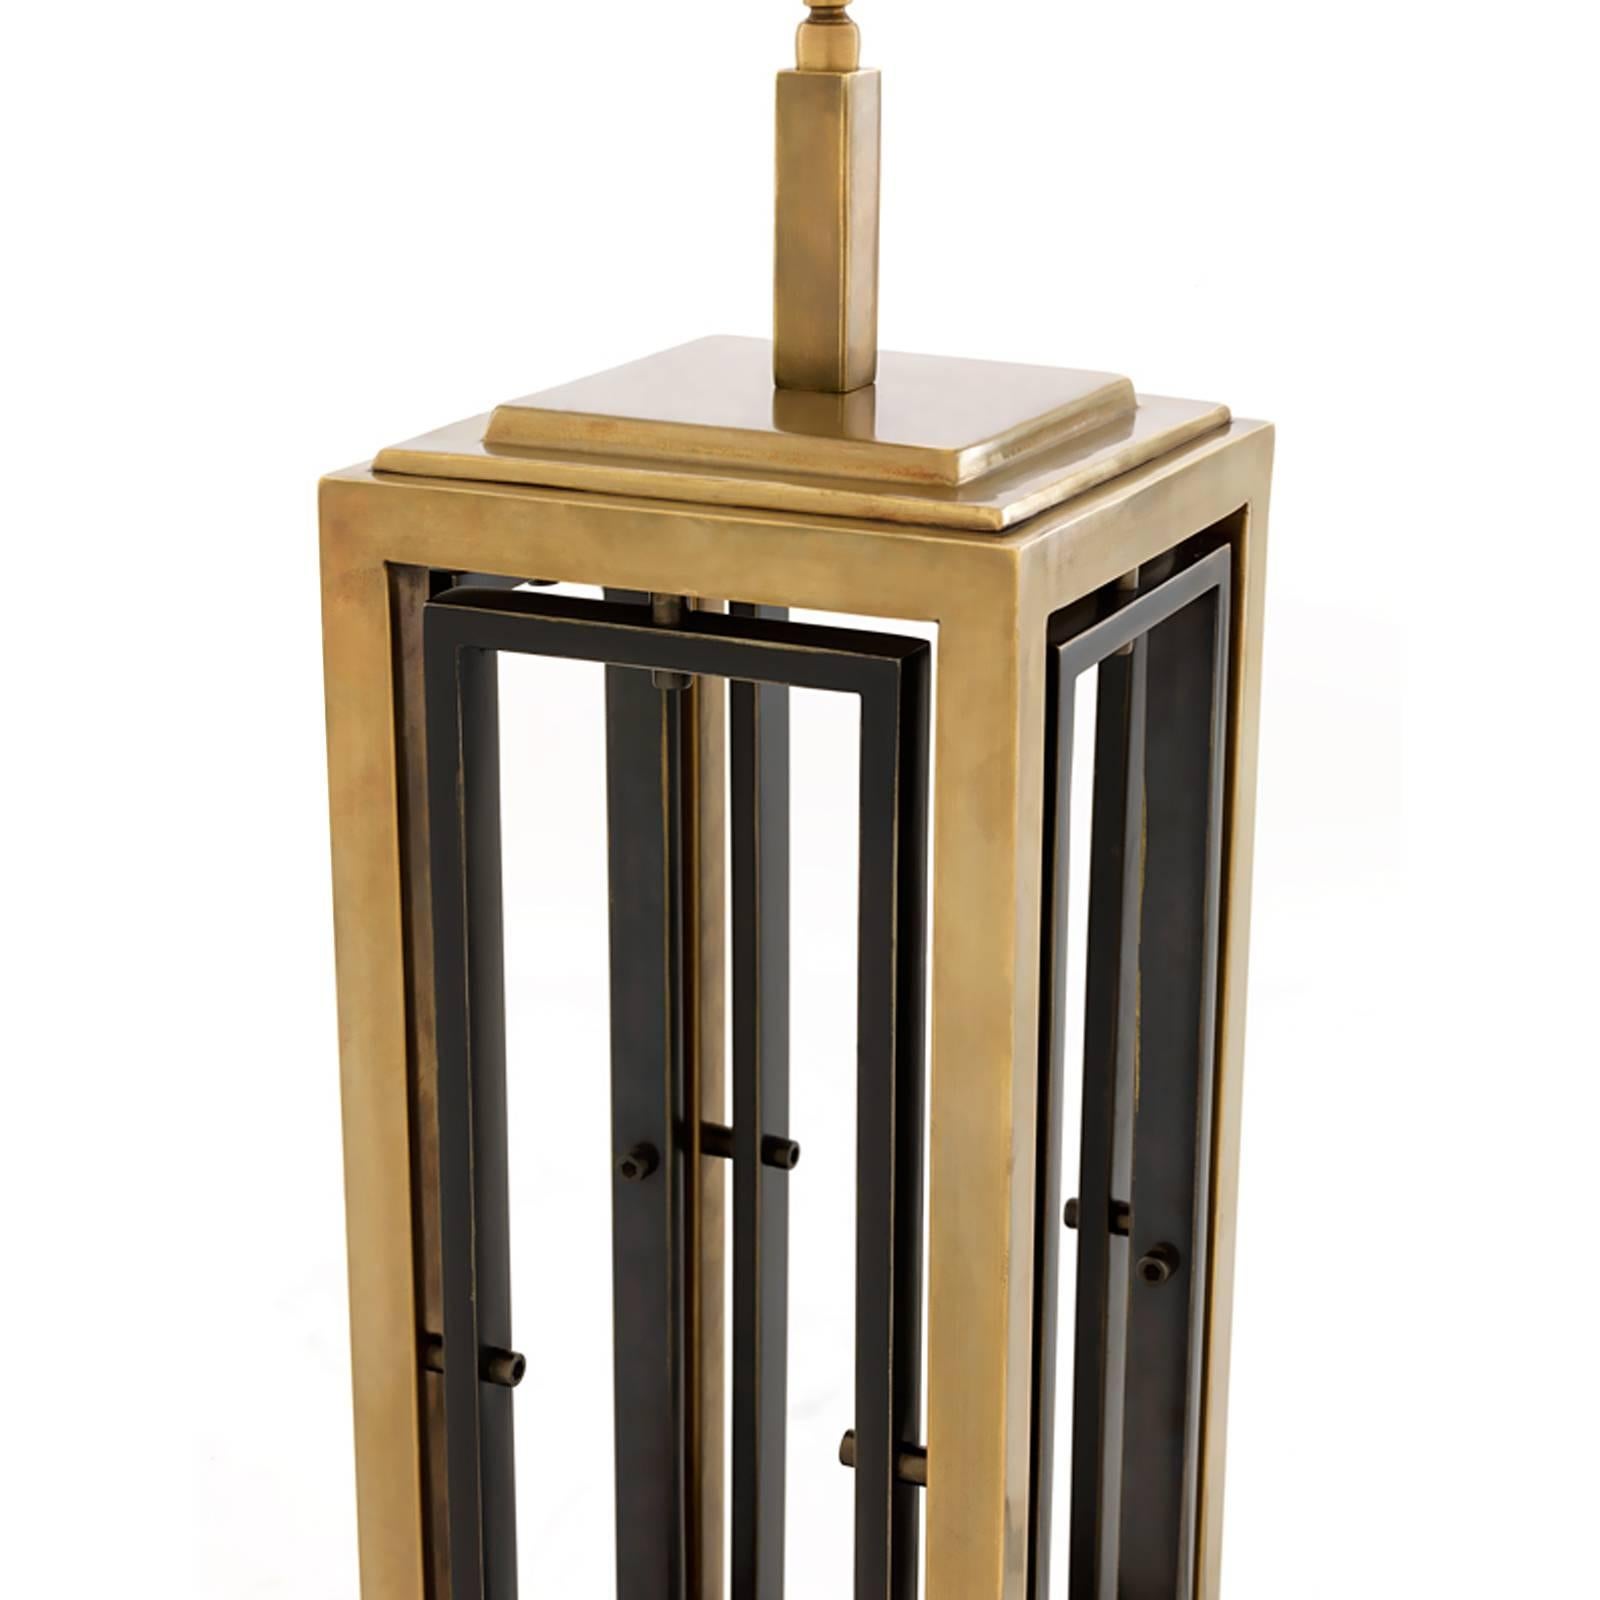 Table lamp stepper with gunmetal and vintage 
brass finish structure. On black granite base,
including black shade. 1 bulb lamp holder type 
E27, maximum 40 watt. Bulb not included.
Also available in polished nickel finish, black
nickel finish on